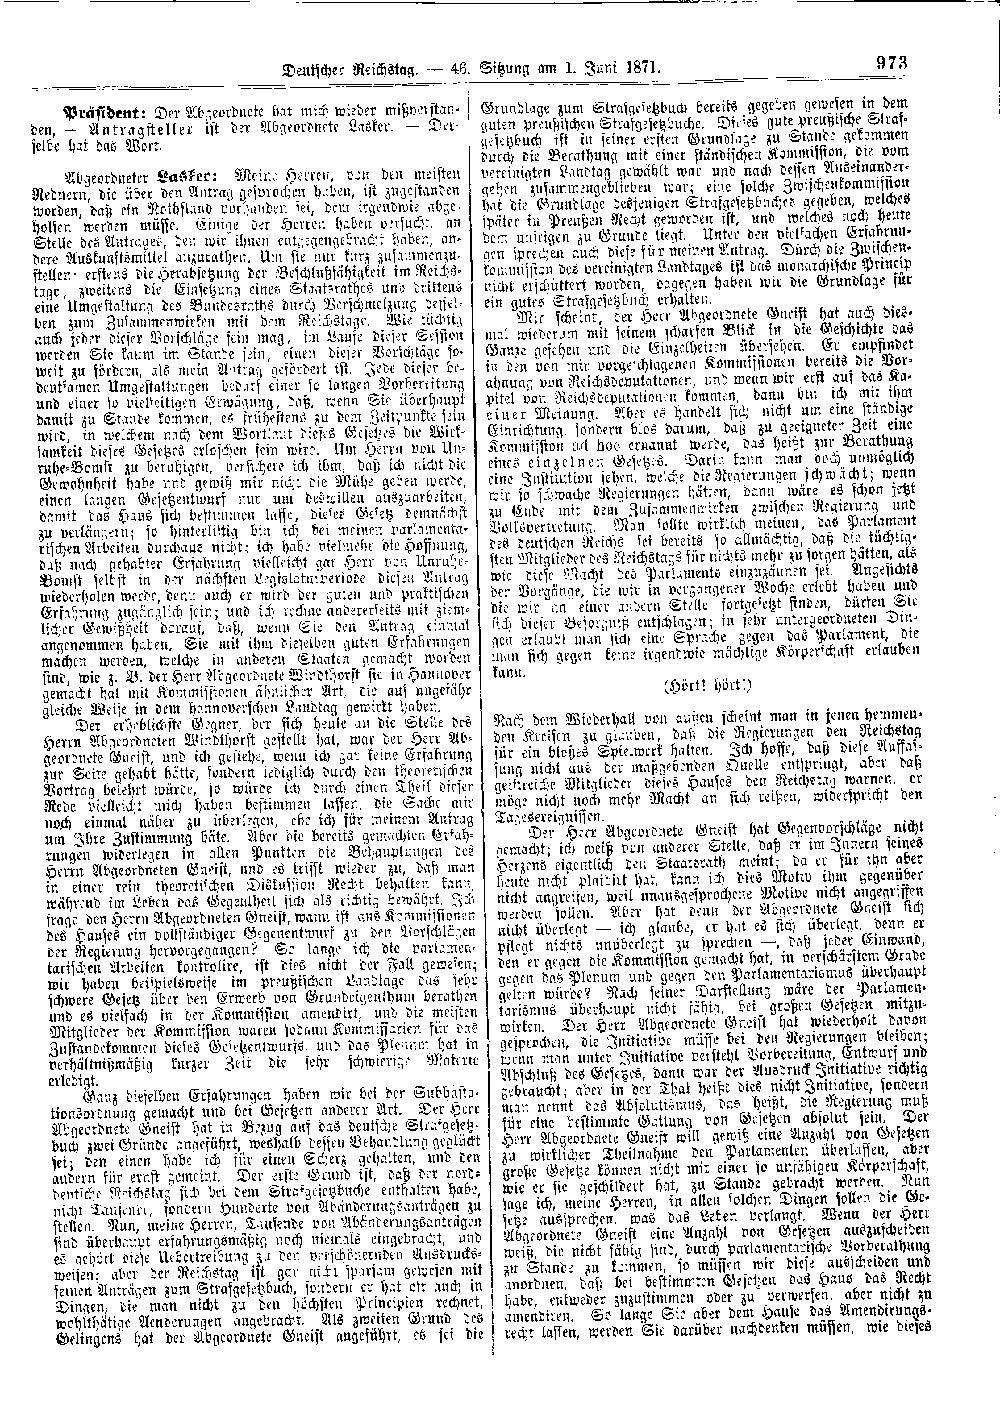 Scan of page 973